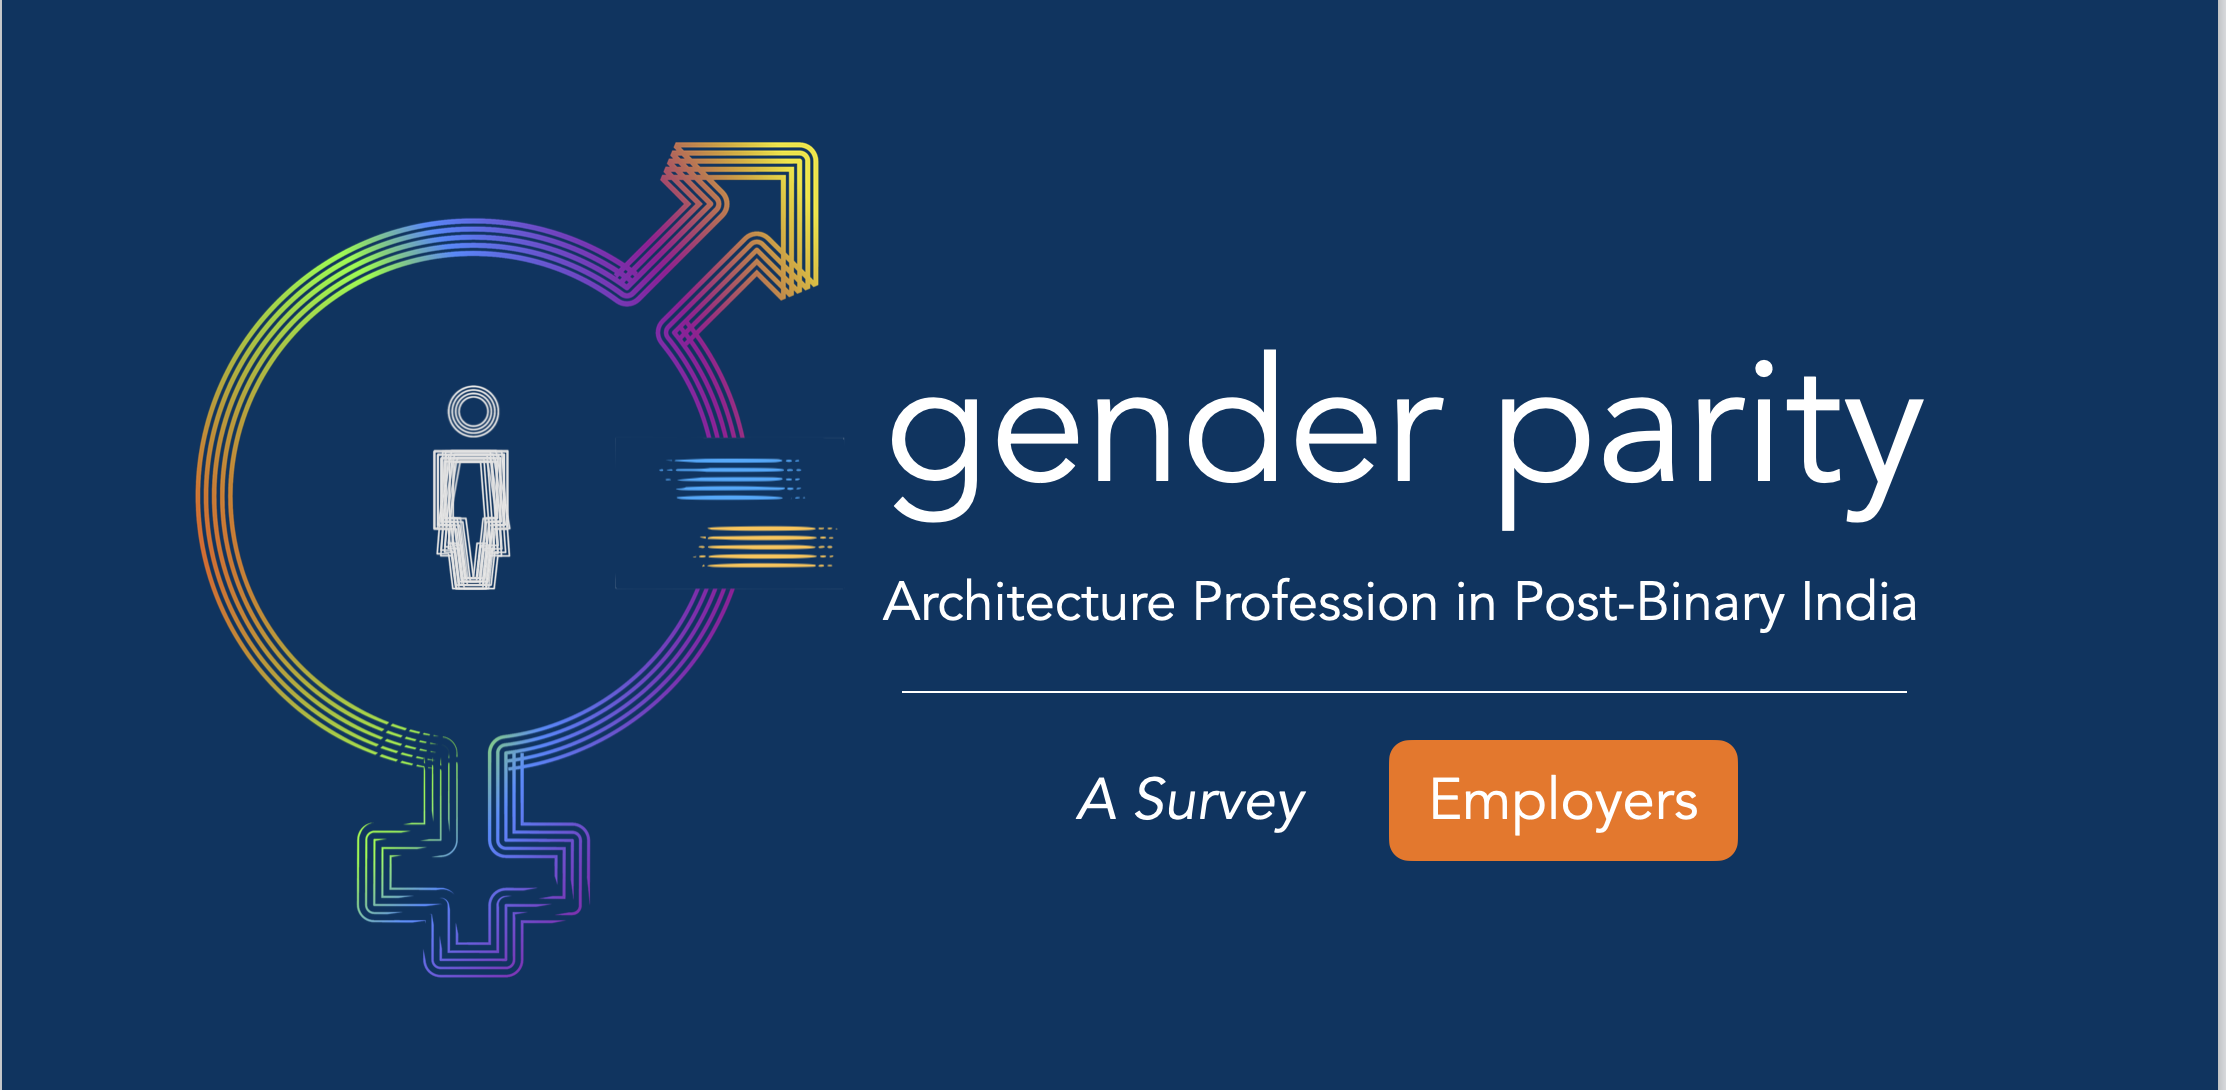 Gender Parity Survey: Architecture Profession in Post-Binary India - Practicing Architects / Employees 1